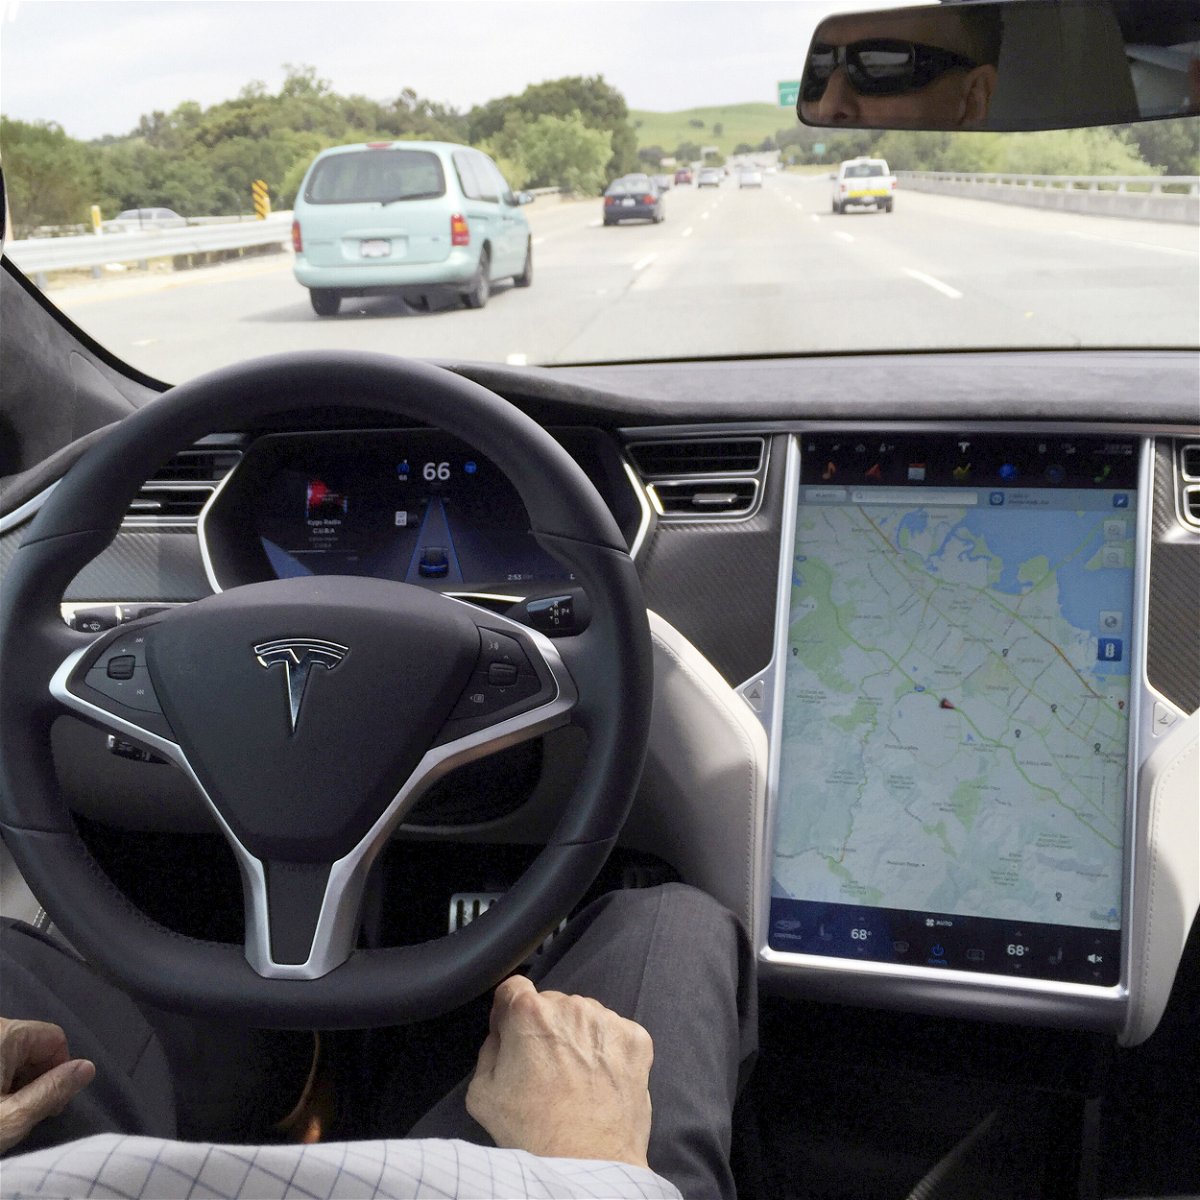 <i>Alexandria Sage/Reuters</i><br/>The interior of a Tesla Model S is shown in autopilot mode in San Francisco